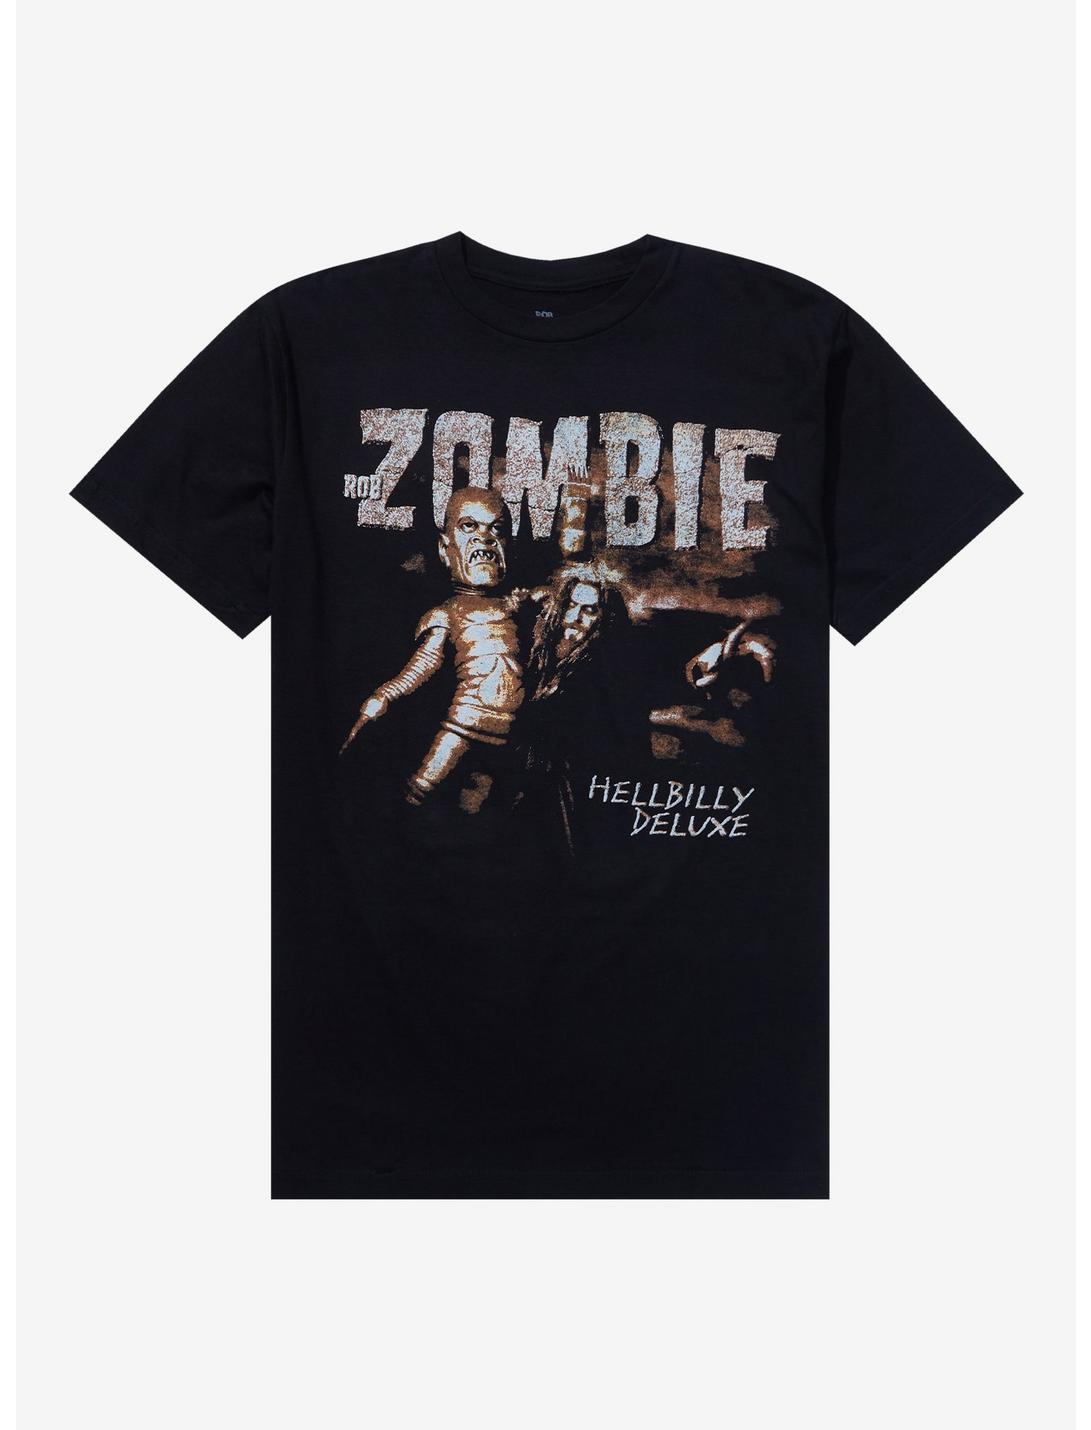 Rob Zombie Hellbilly Deluxe Tour T-Shirt, BLACK, hi-res